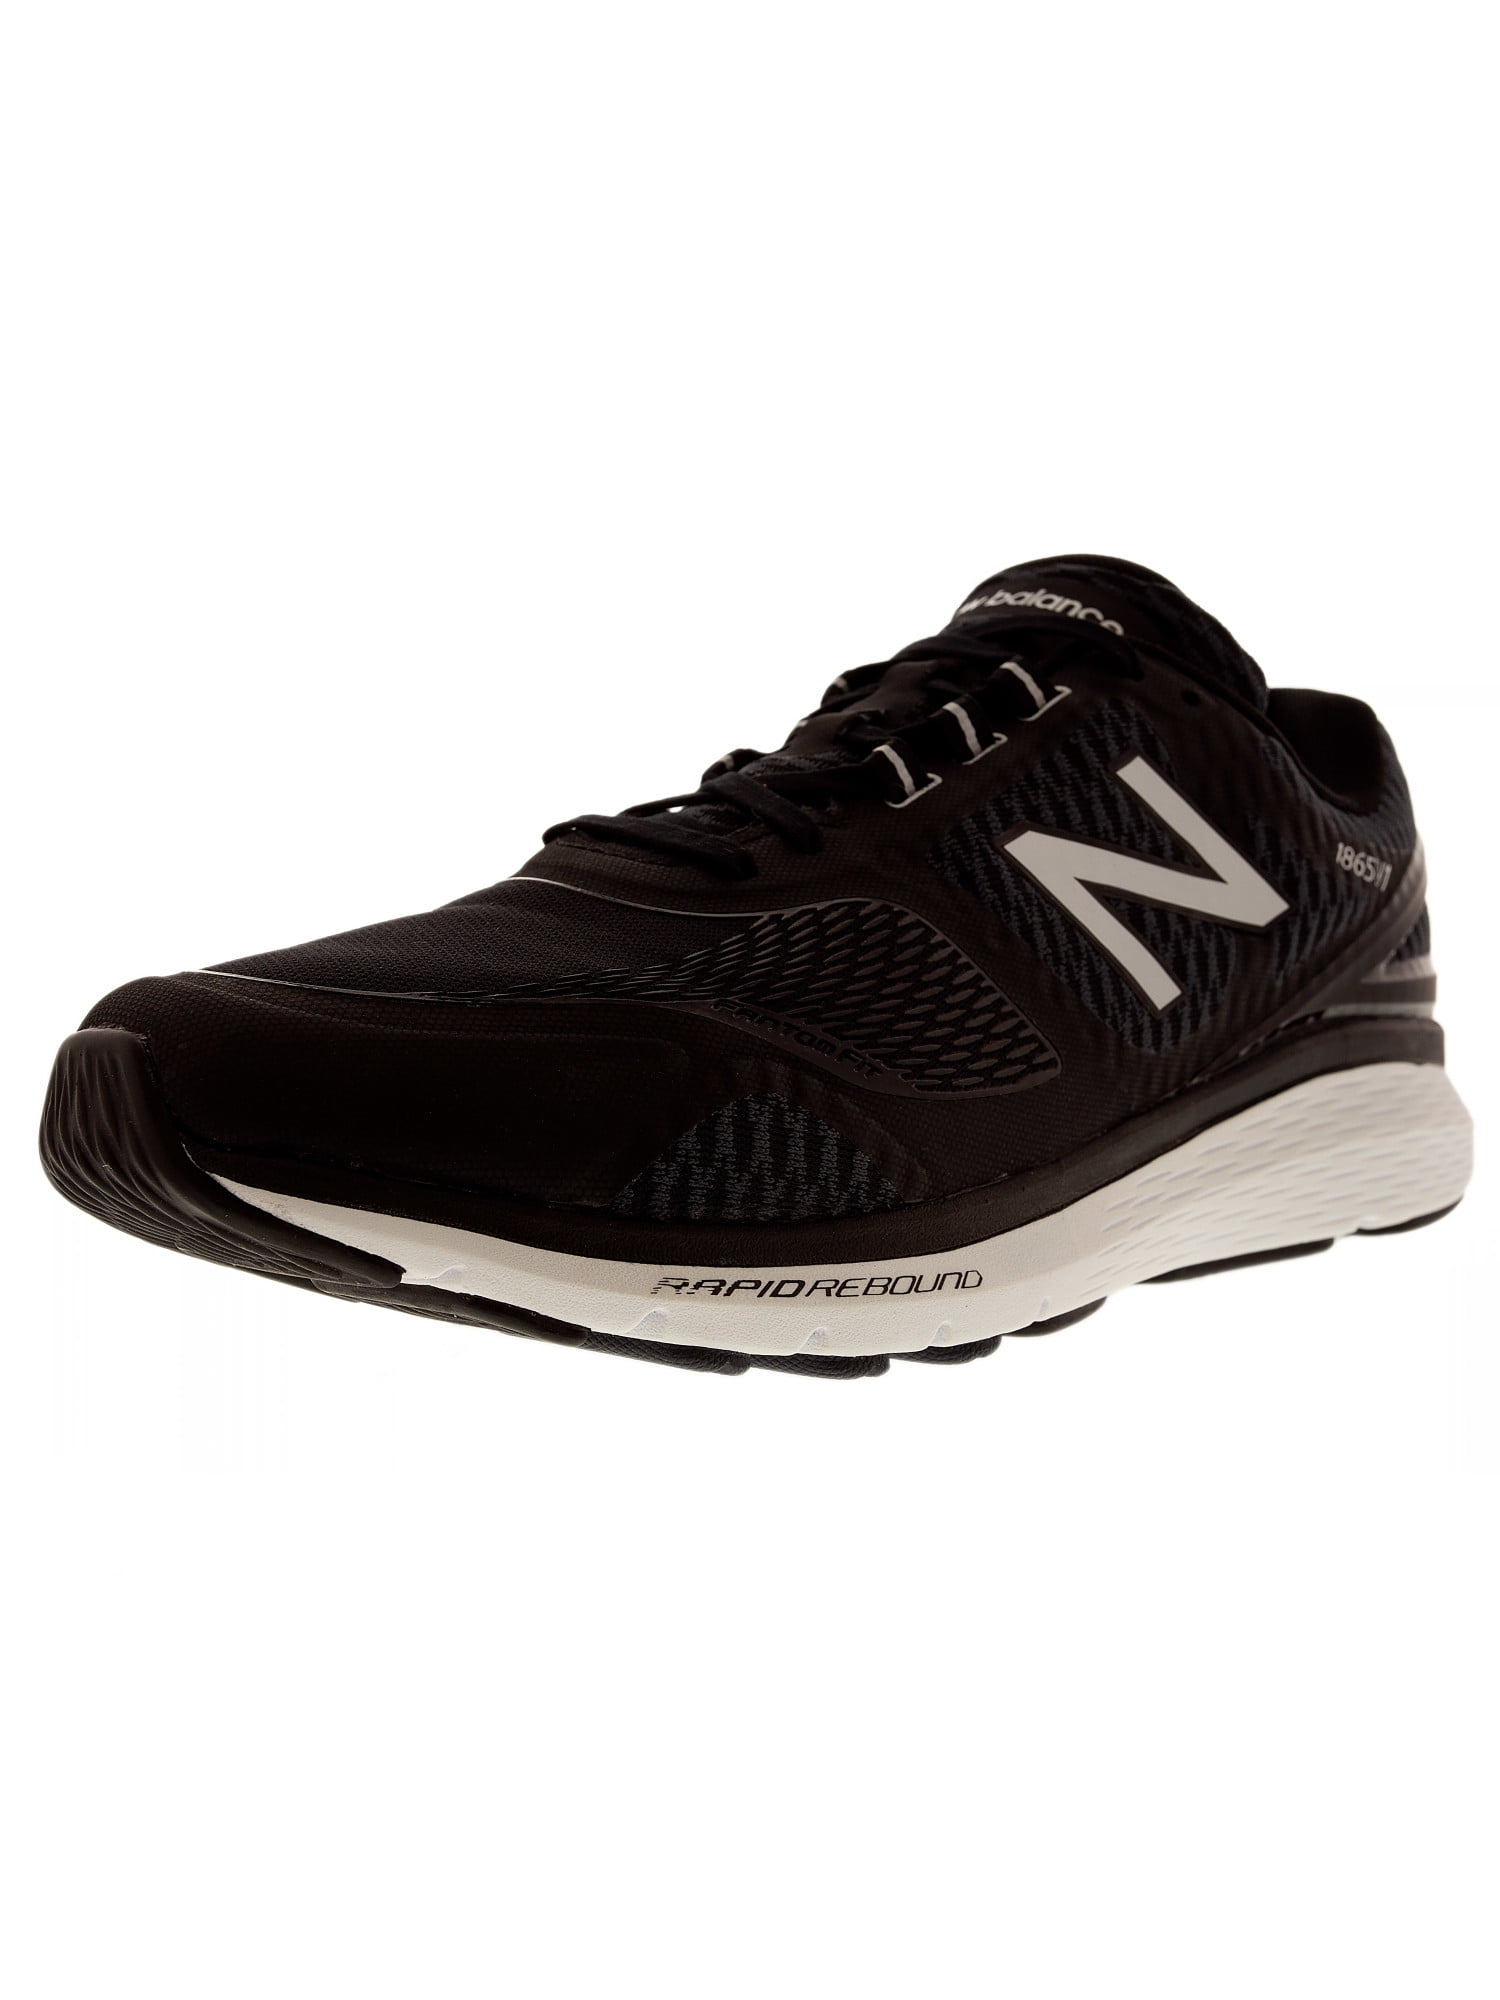 New Balance Men's Mw1865 Bs Ankle-High 